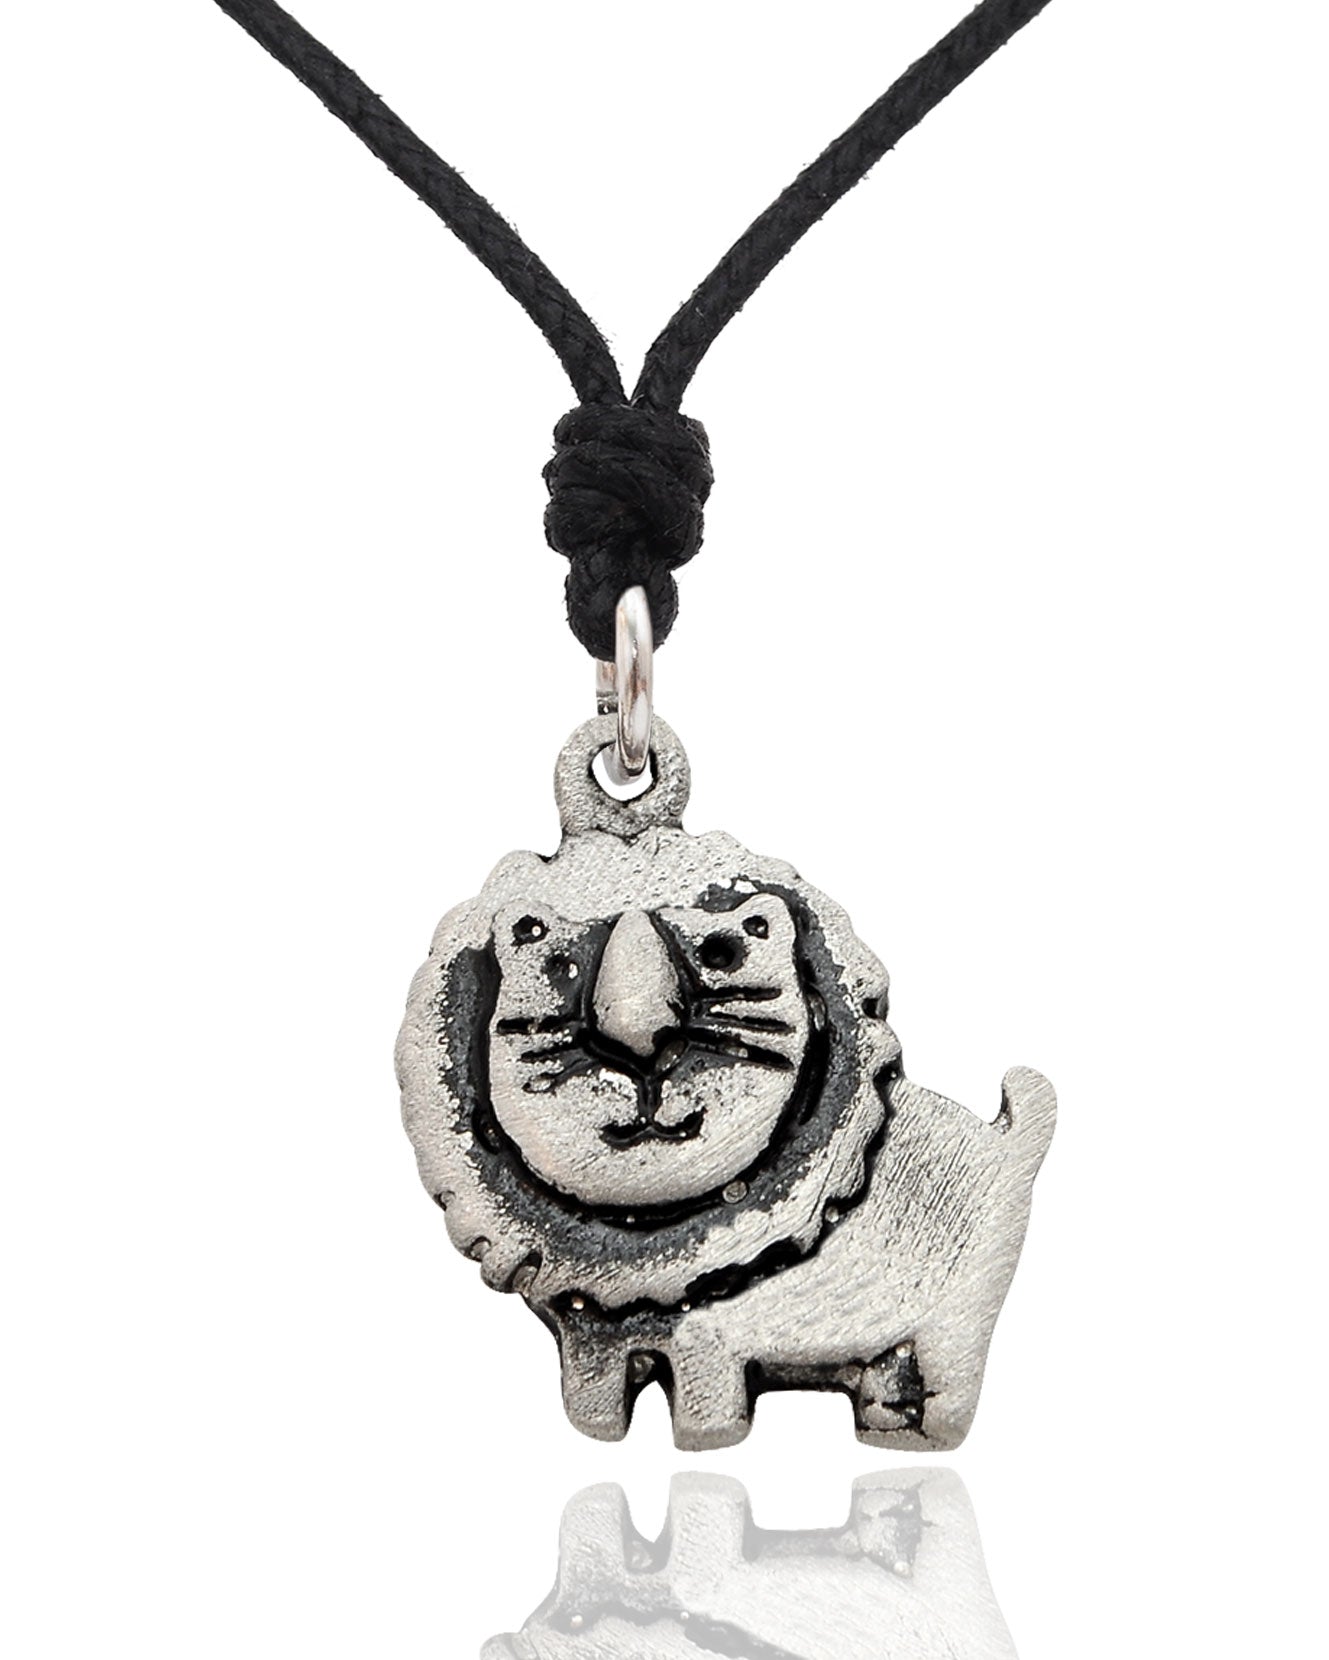 Lion Big Cat Silver Pewter Charm Necklace Pendant Jewelry